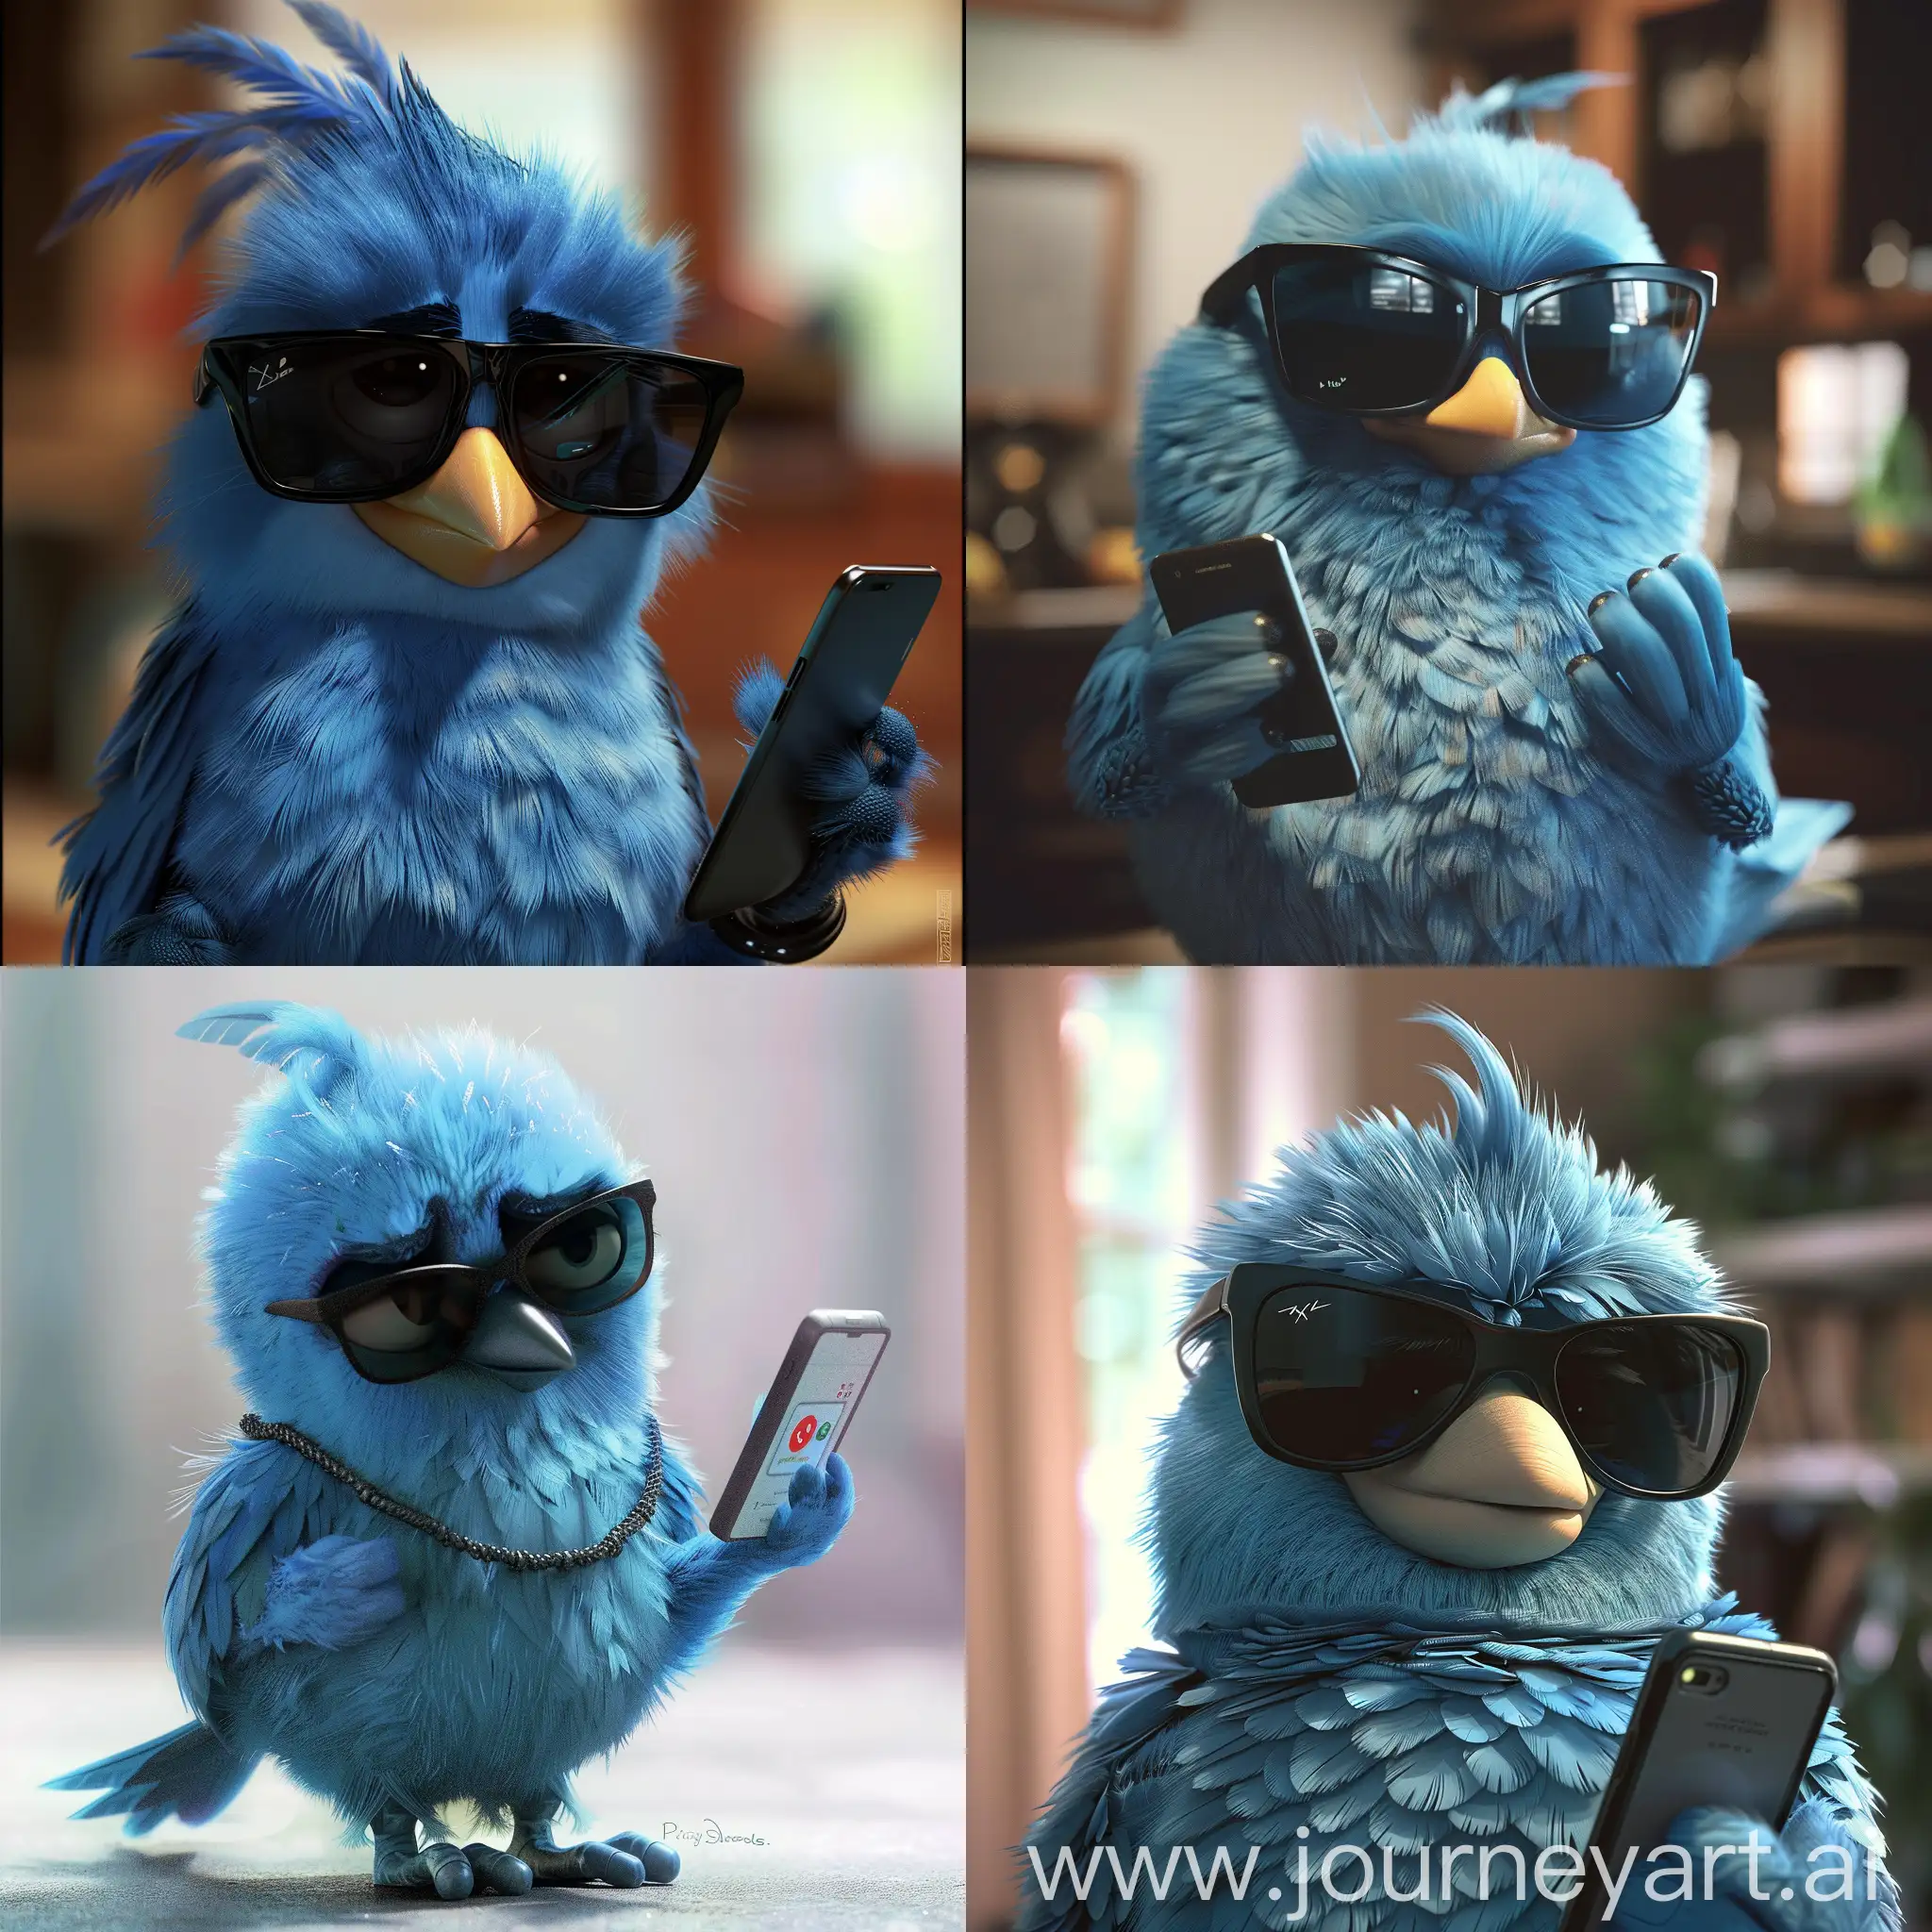 The Blue Bird from Twitter X, cool and kind look, black sunglasses, looks you in the eye and shows you his phone. , style Pixar 